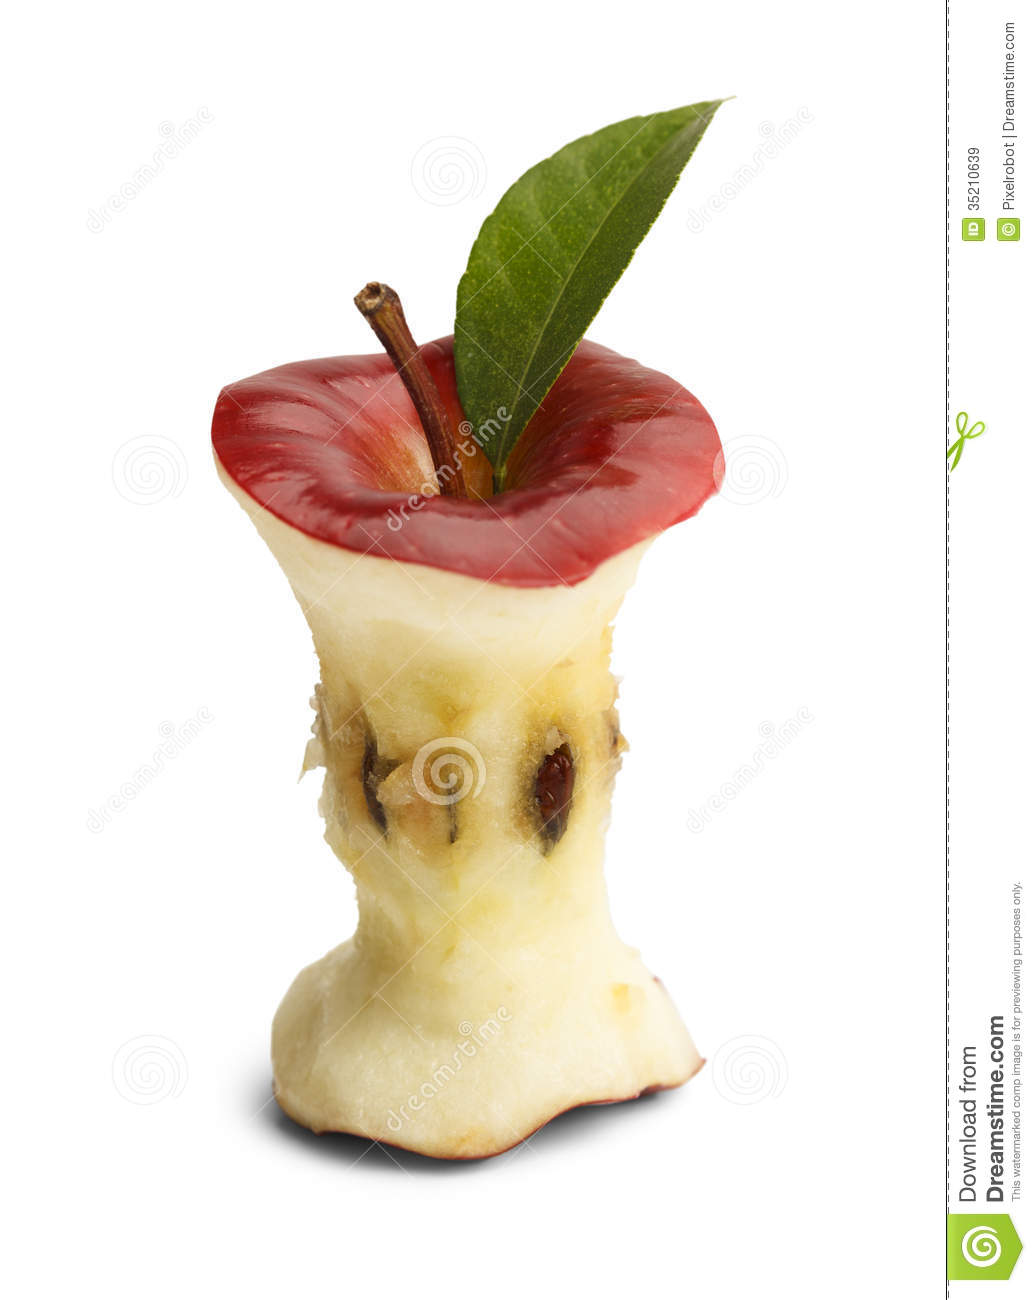 Apple Core Royalty Free Stock Images   Image  35210639